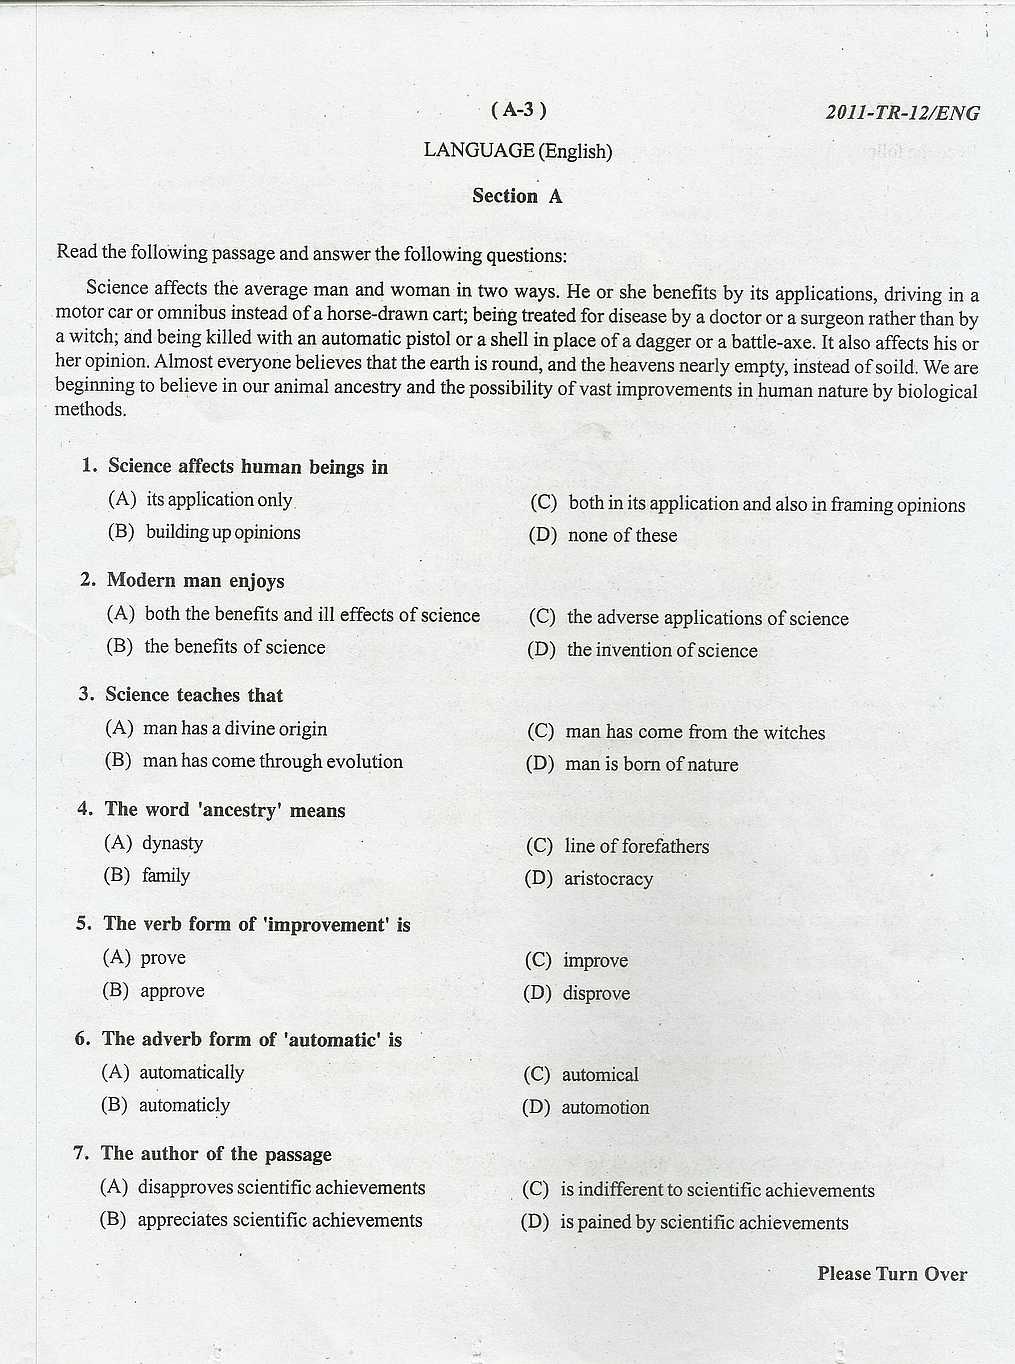 WB Primary TET Question Paper PDF - 2020 2021 Student Forum